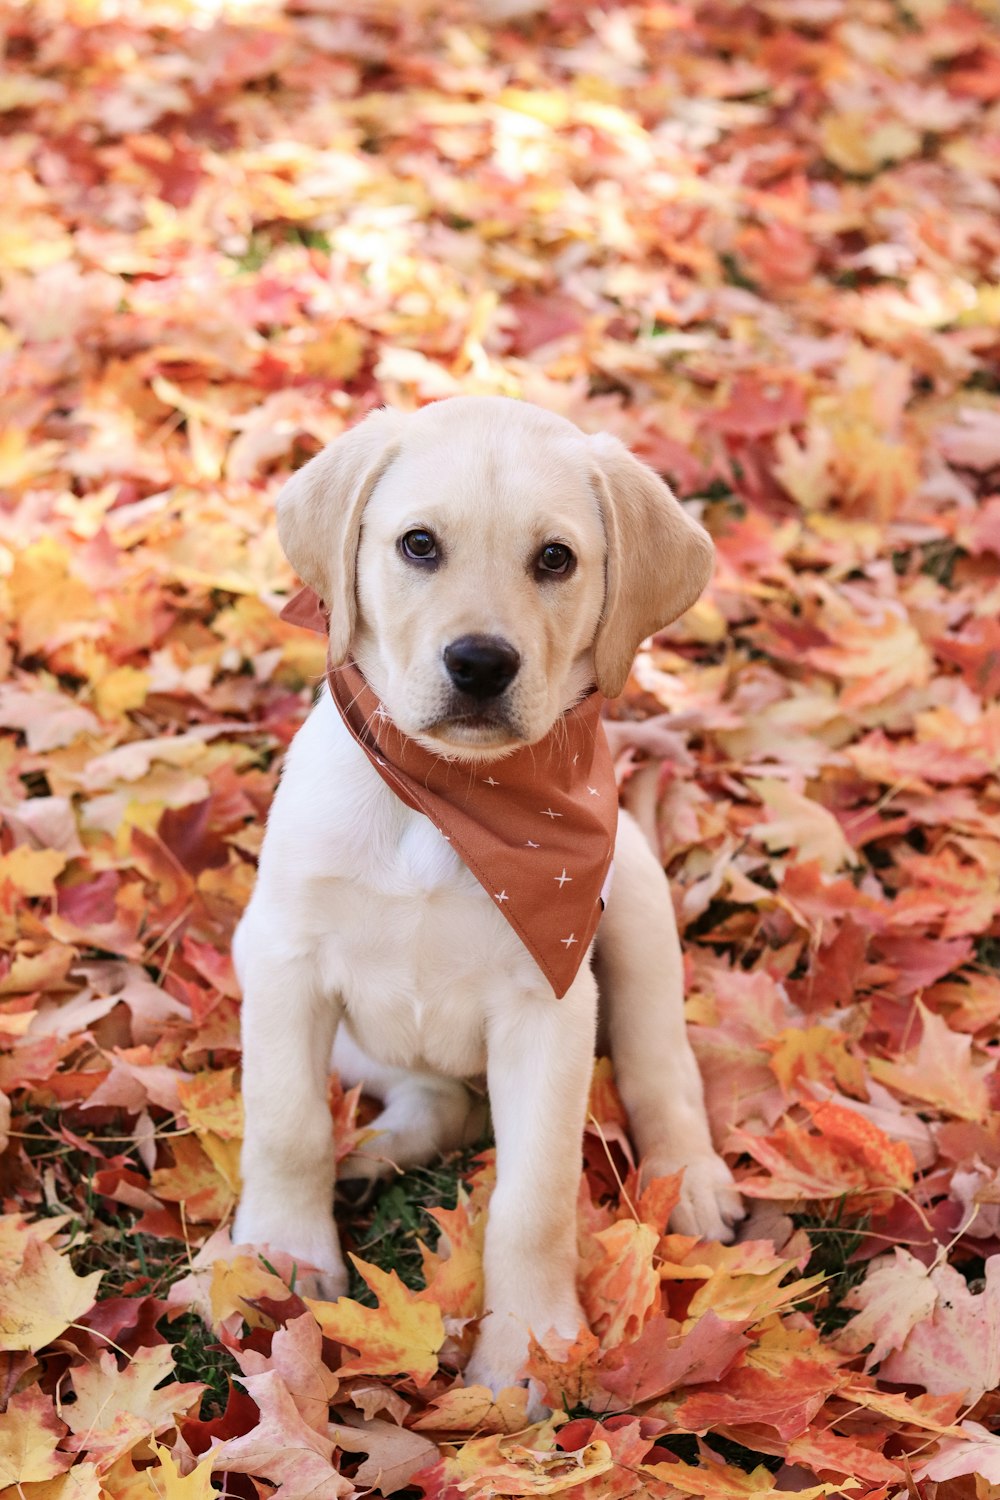 a dog sitting in a pile of leaves